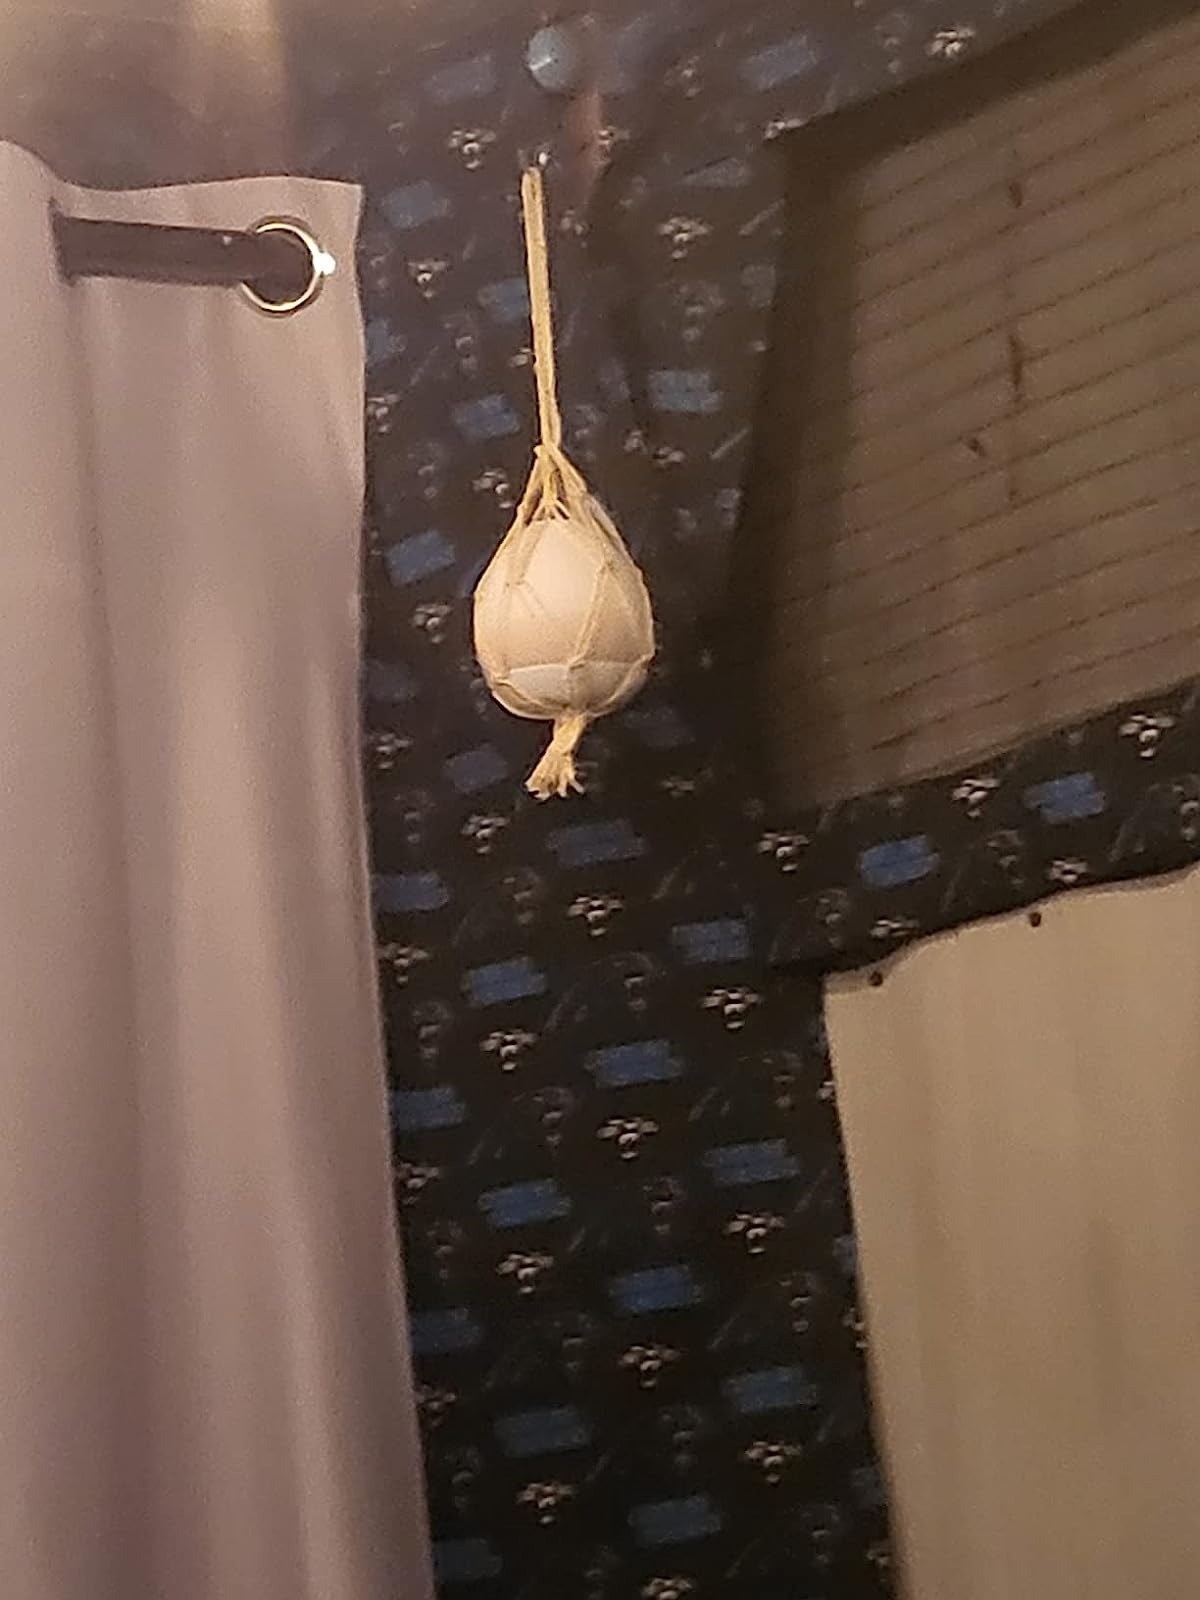 The reviewer&#x27;s photo of the egg hanging from ceiling